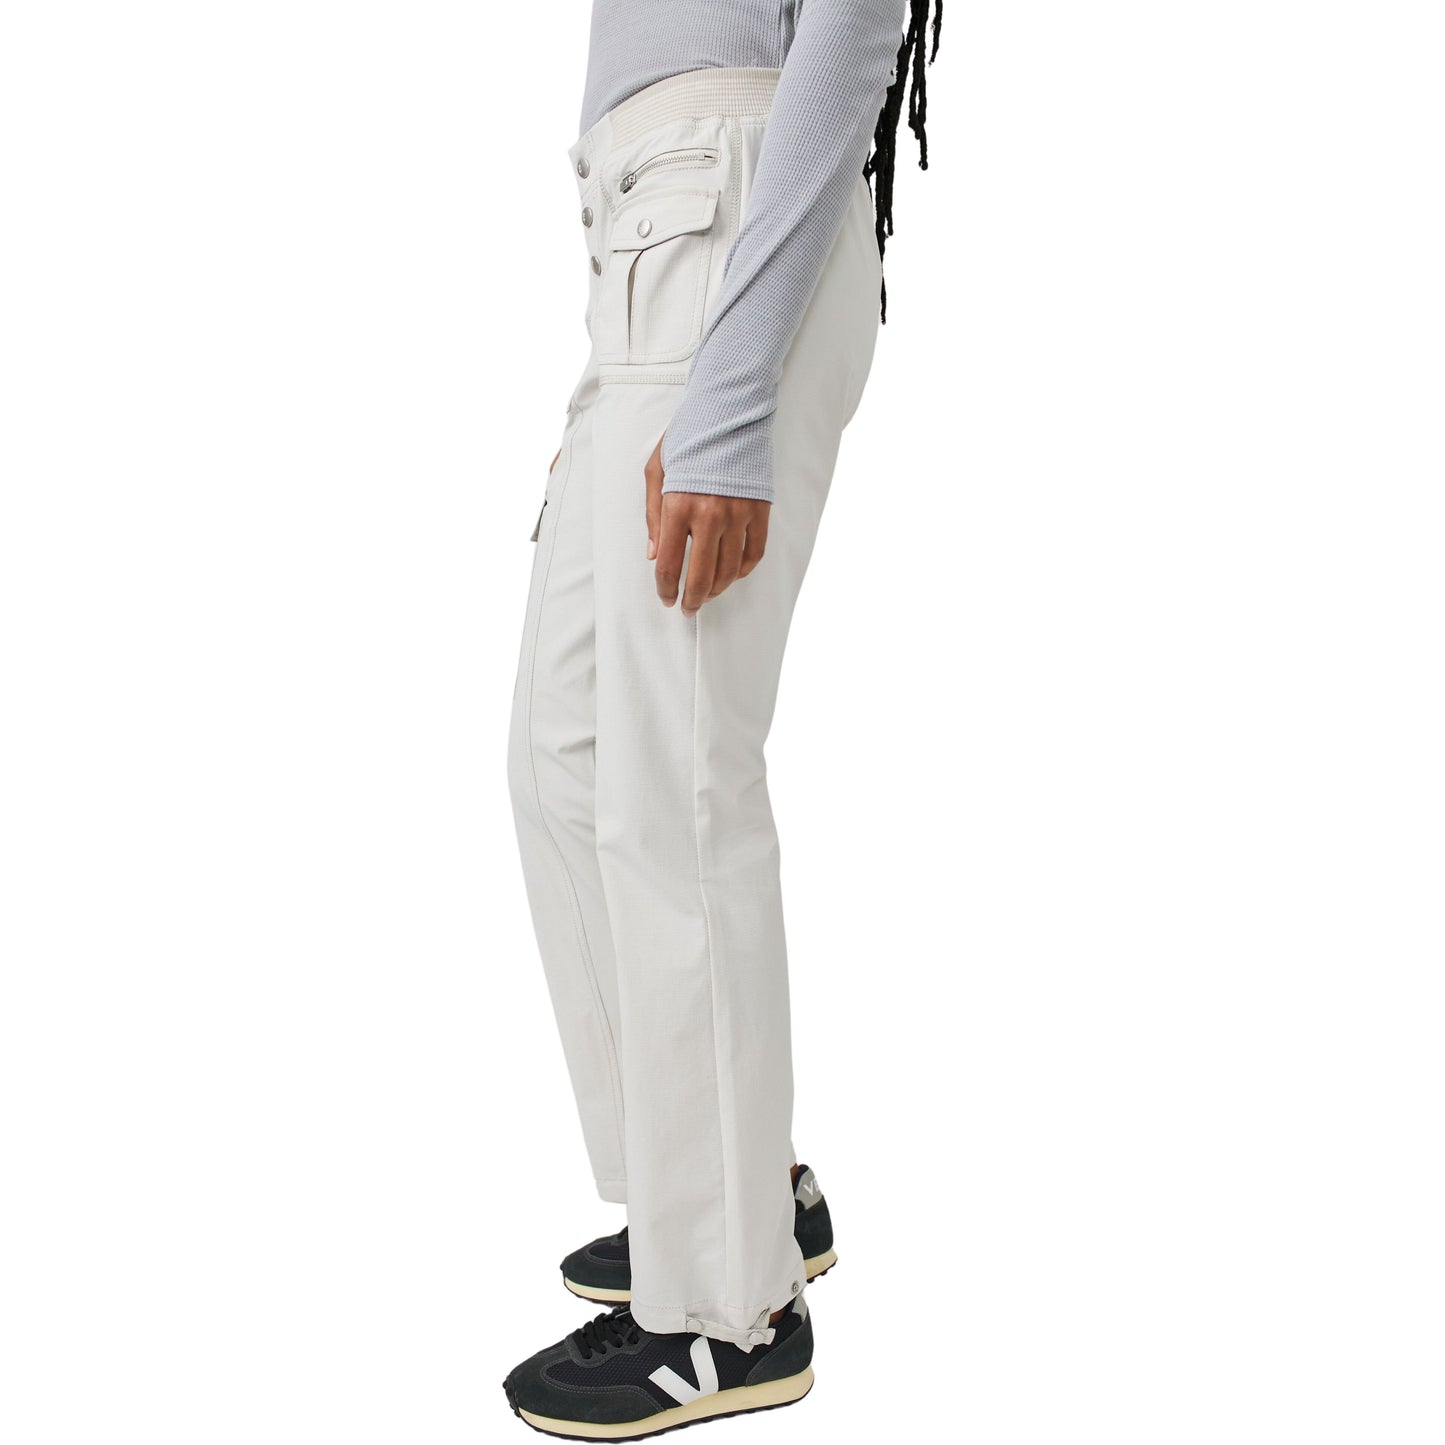 A person standing side-view wearing Cascade Flare pants in Muted Beige and Free People Movement black sneakers with white logos. Only the lower half of the body is visible.